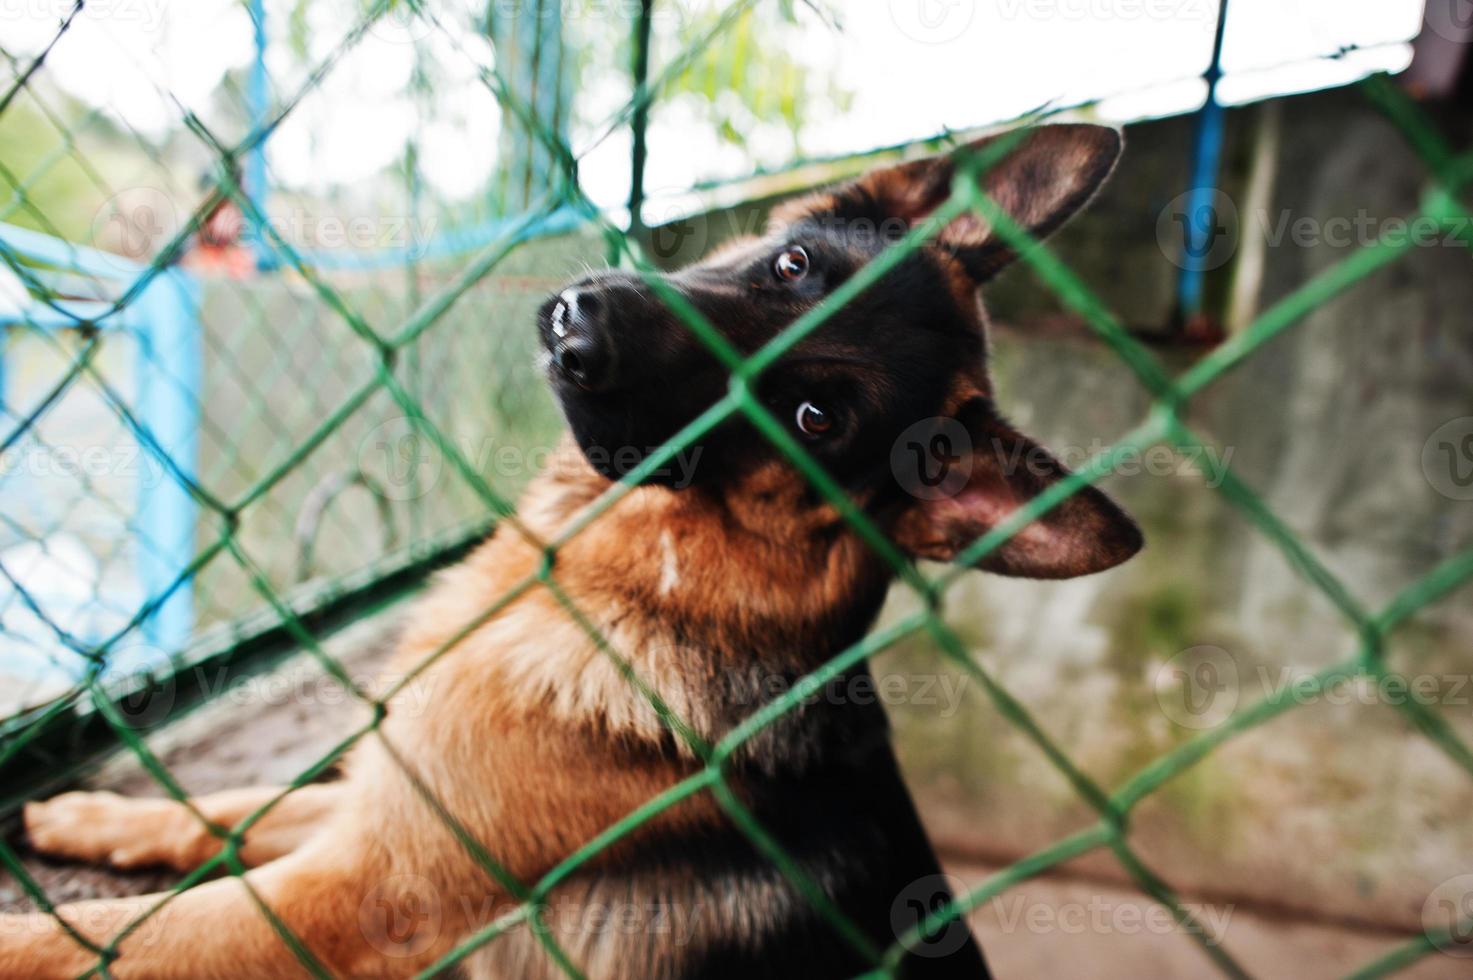 Close-up photo of a dog's snout in a cage.